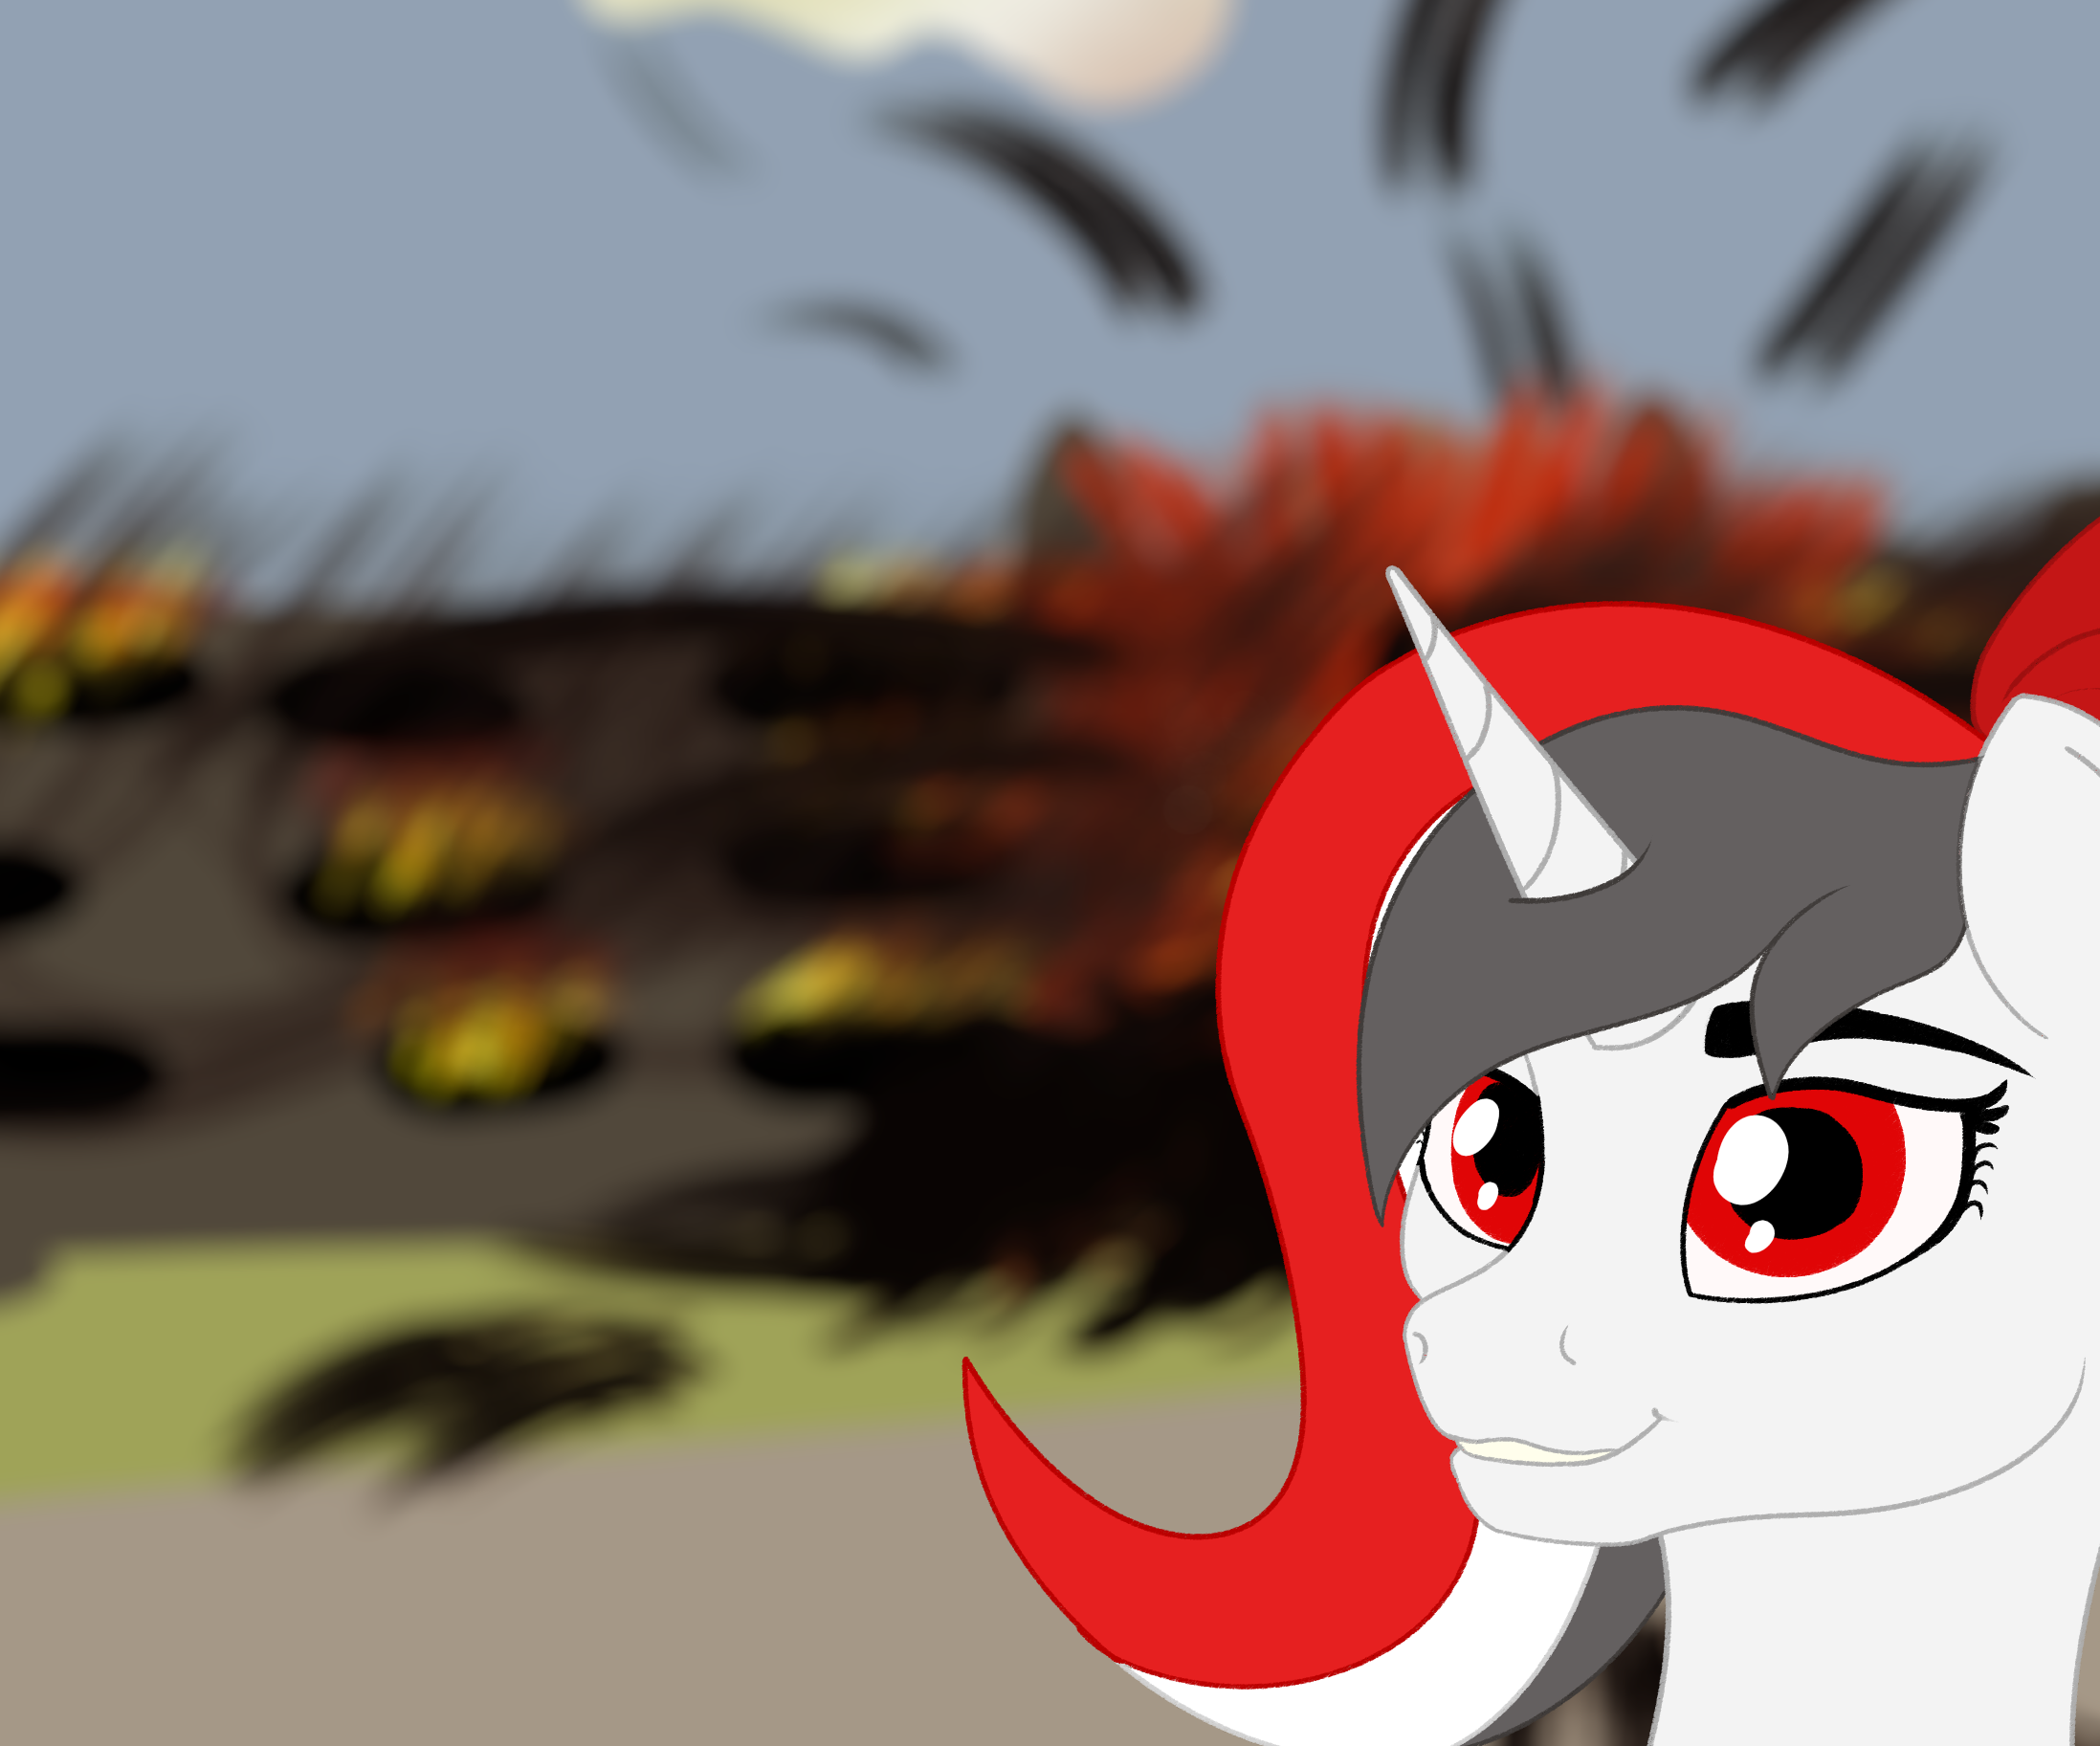 3342301__safe_artist-colon-kujivunia_oc_oc+only_oc-colon-red+rocket_unicorn_colored_destruction_explosion_fire_flat+colors_horn_meme_red+eyes_smiling_solo_three.png